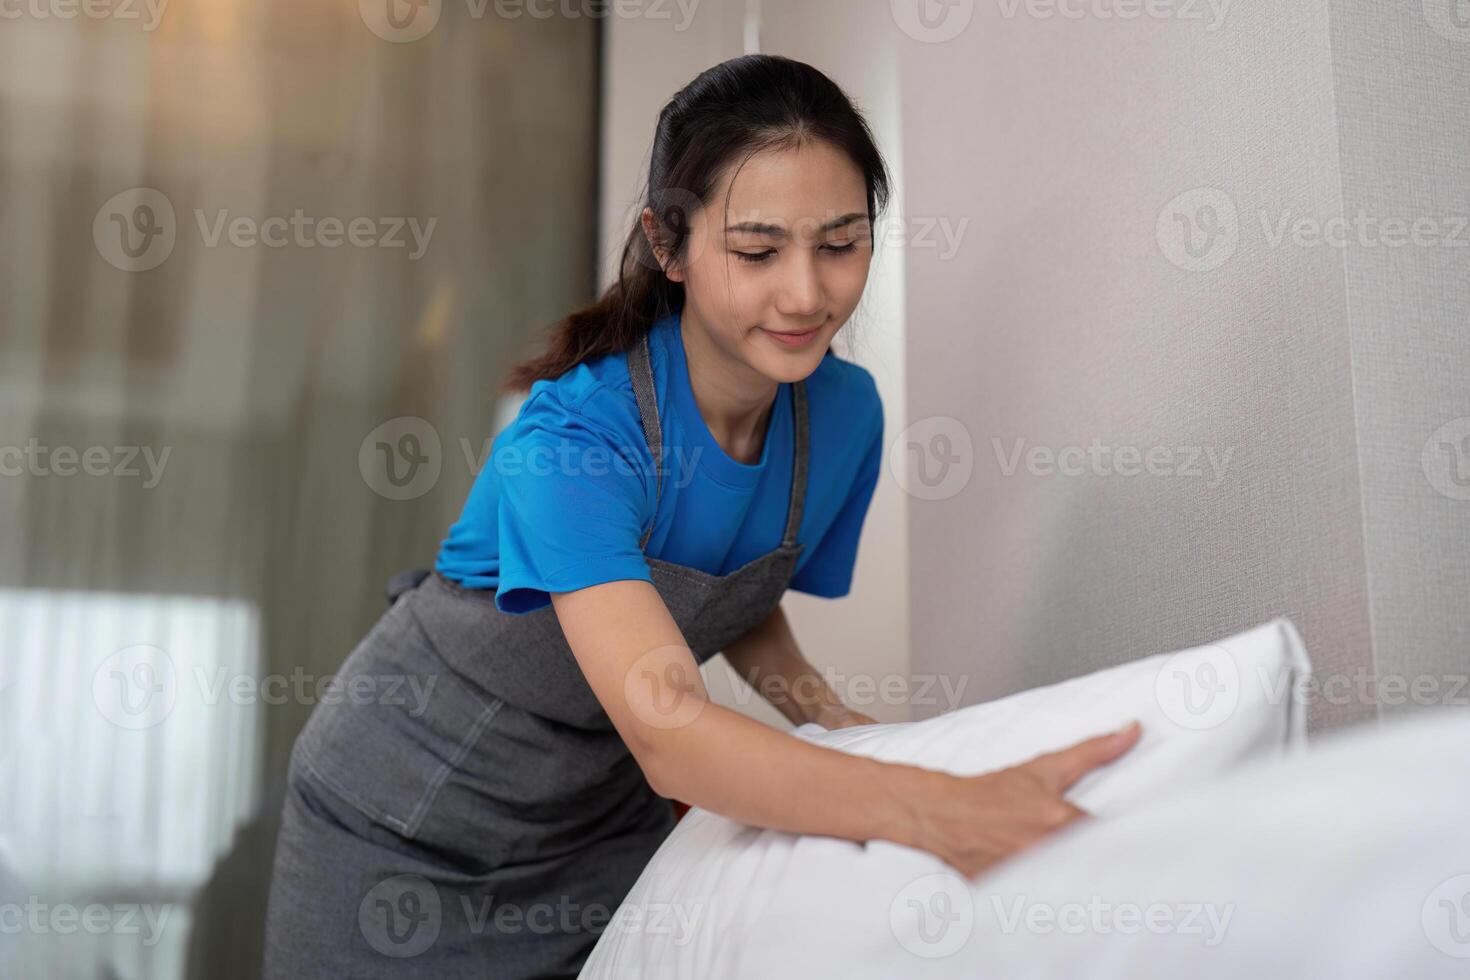 A woman asian staff cleaning service, tool and bucket for work. a young female cleaner with products to clean a bedroom photo